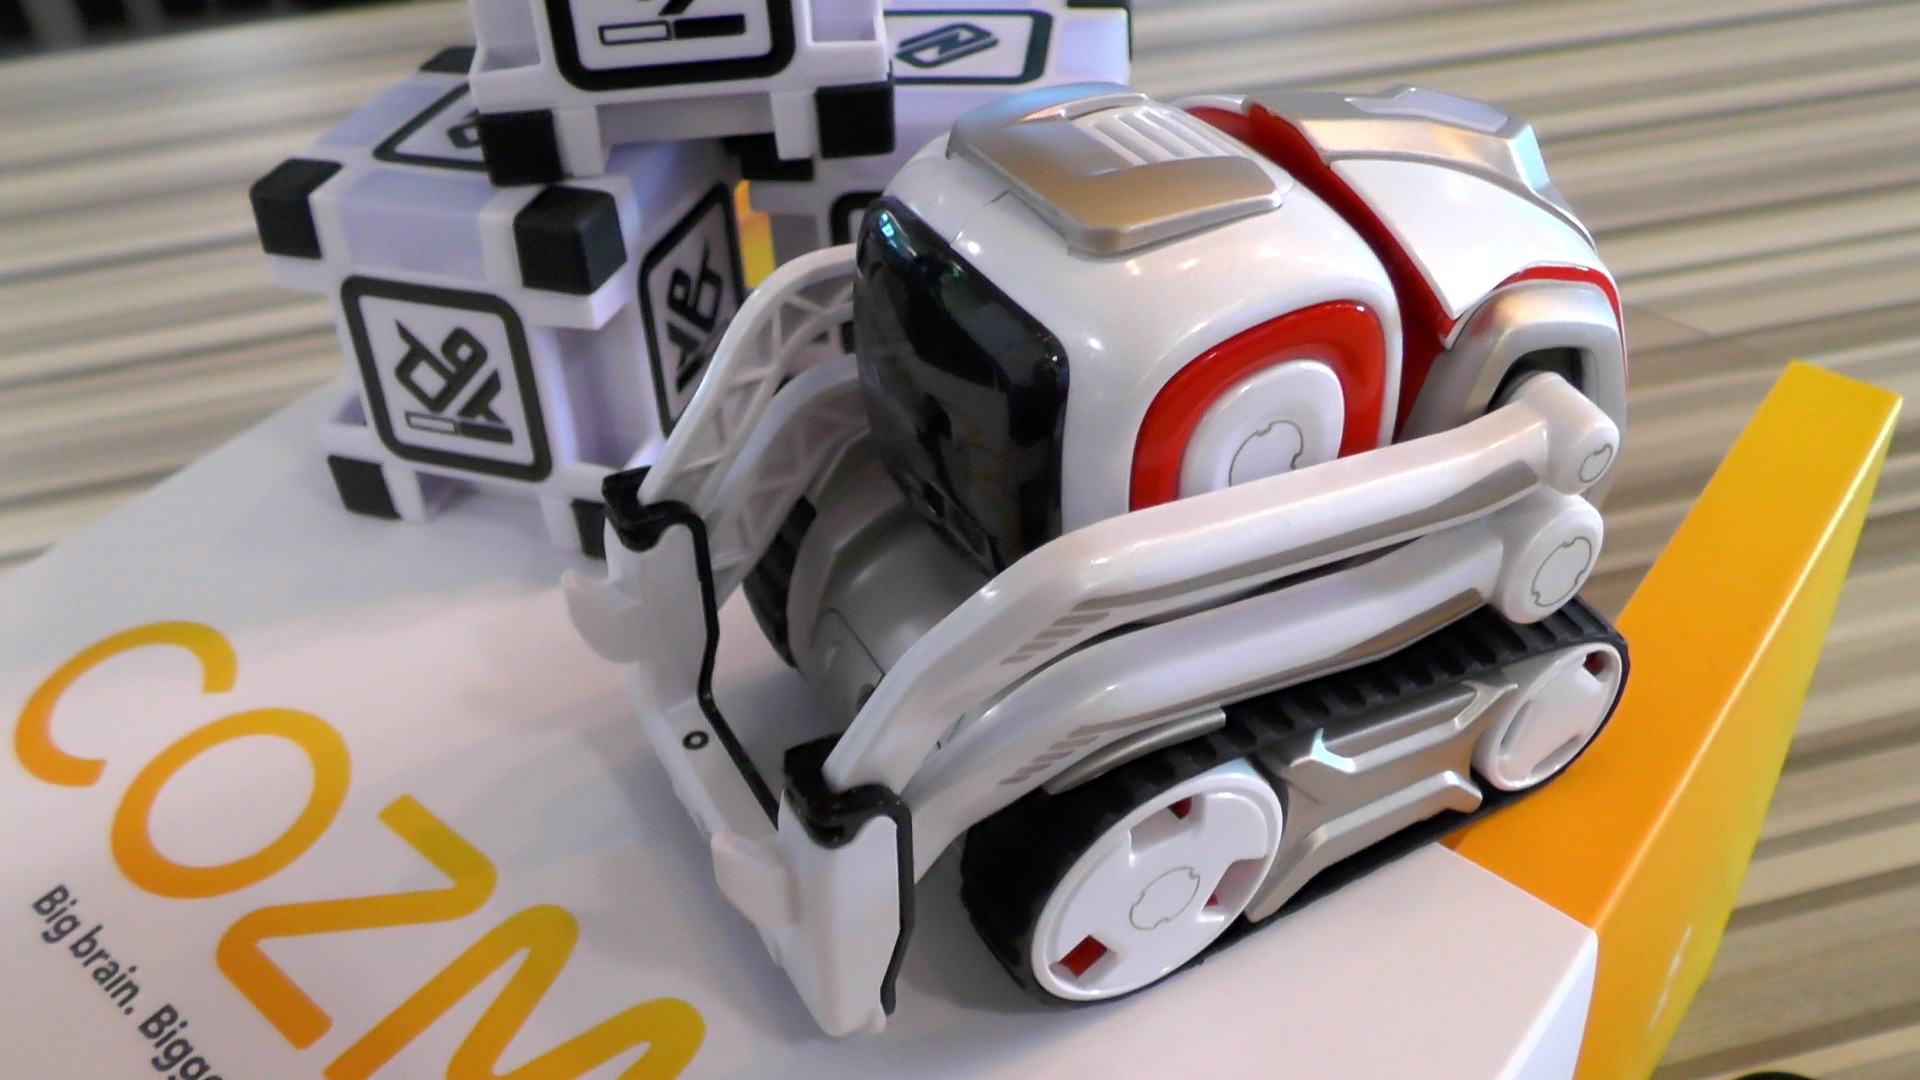 Cozmo is an intelligent robot that will fake you out